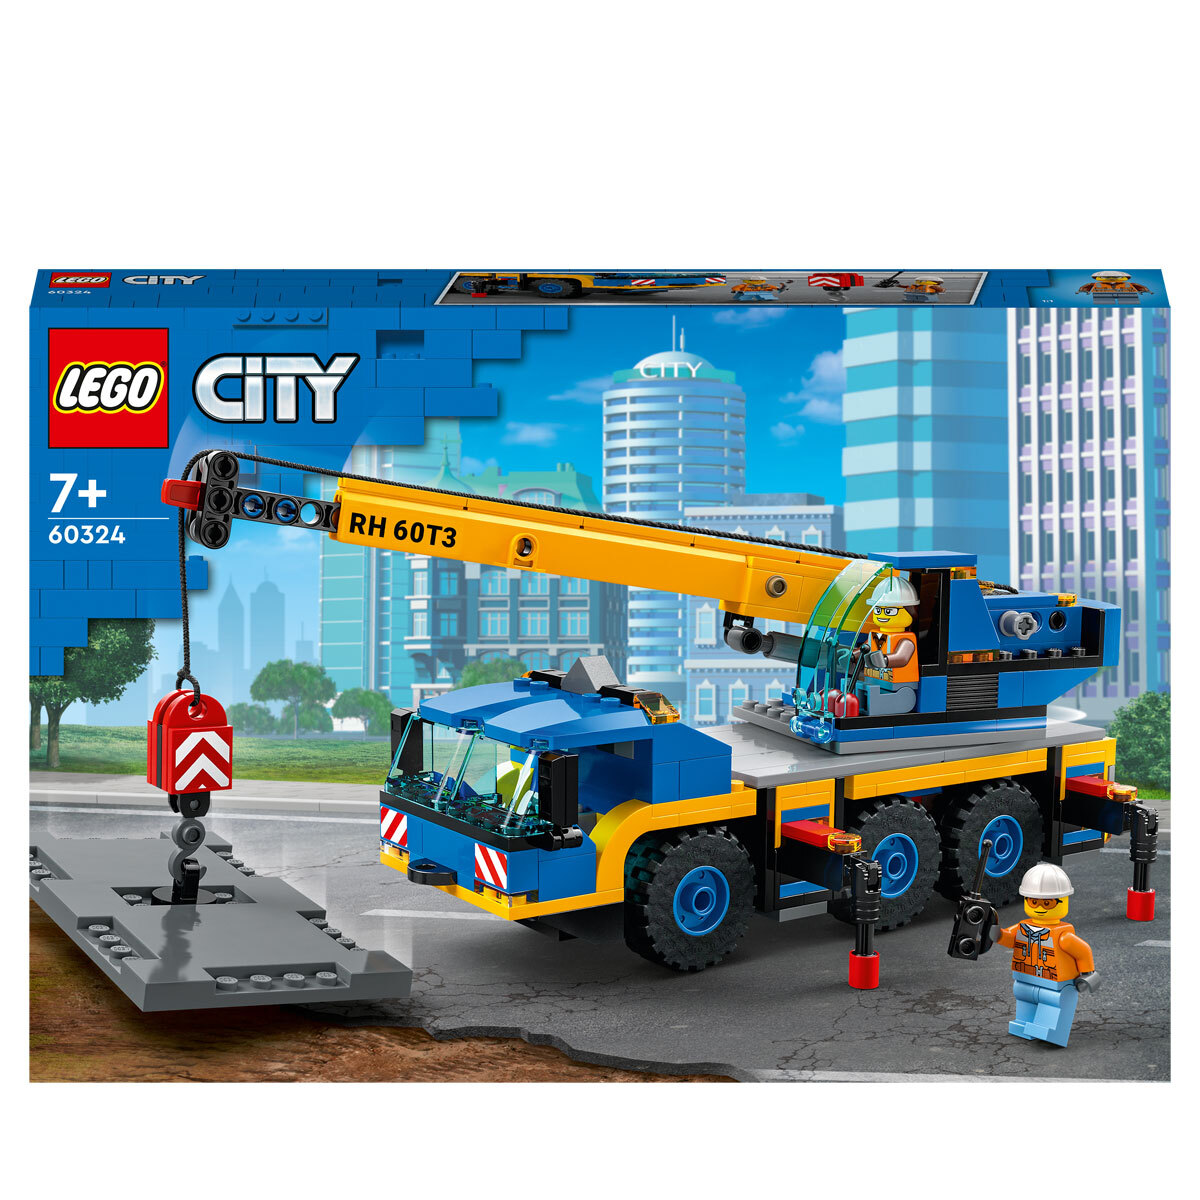 LEGO City Great Vehicles Mobile Crane Truck Toy 60324